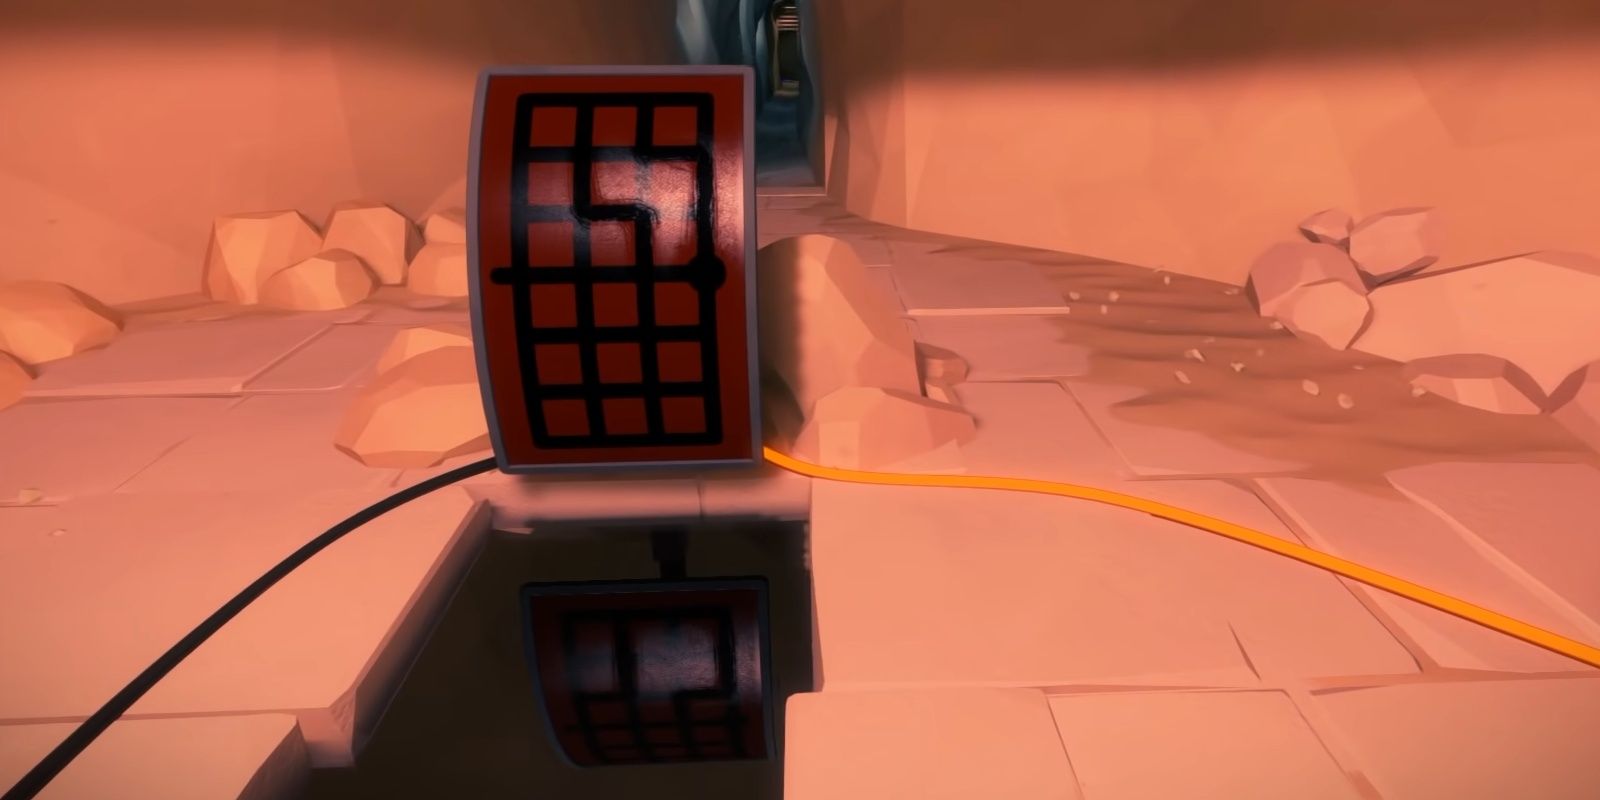 This grate cover is actually a part of the puzzle in The Witness.